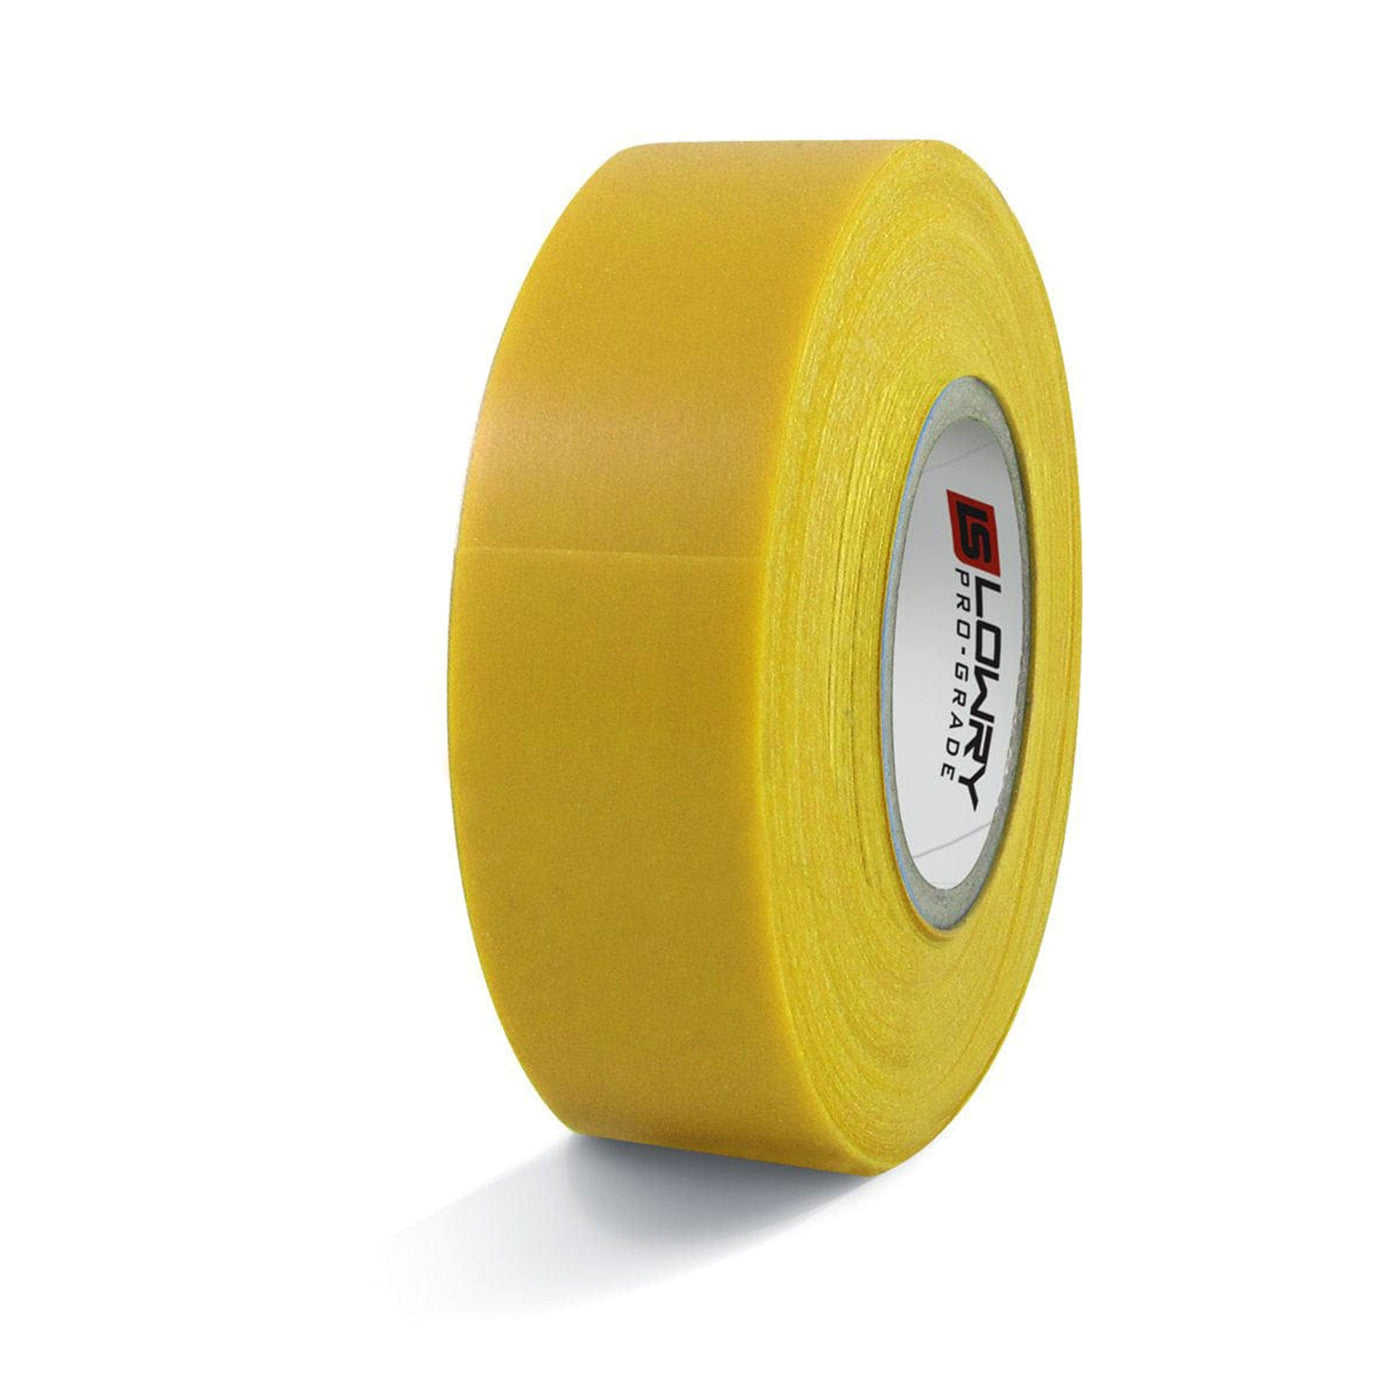 Lowry Sports Pro-Grade Colored Hockey Sock Tape - The Hockey Shop Source For Sports